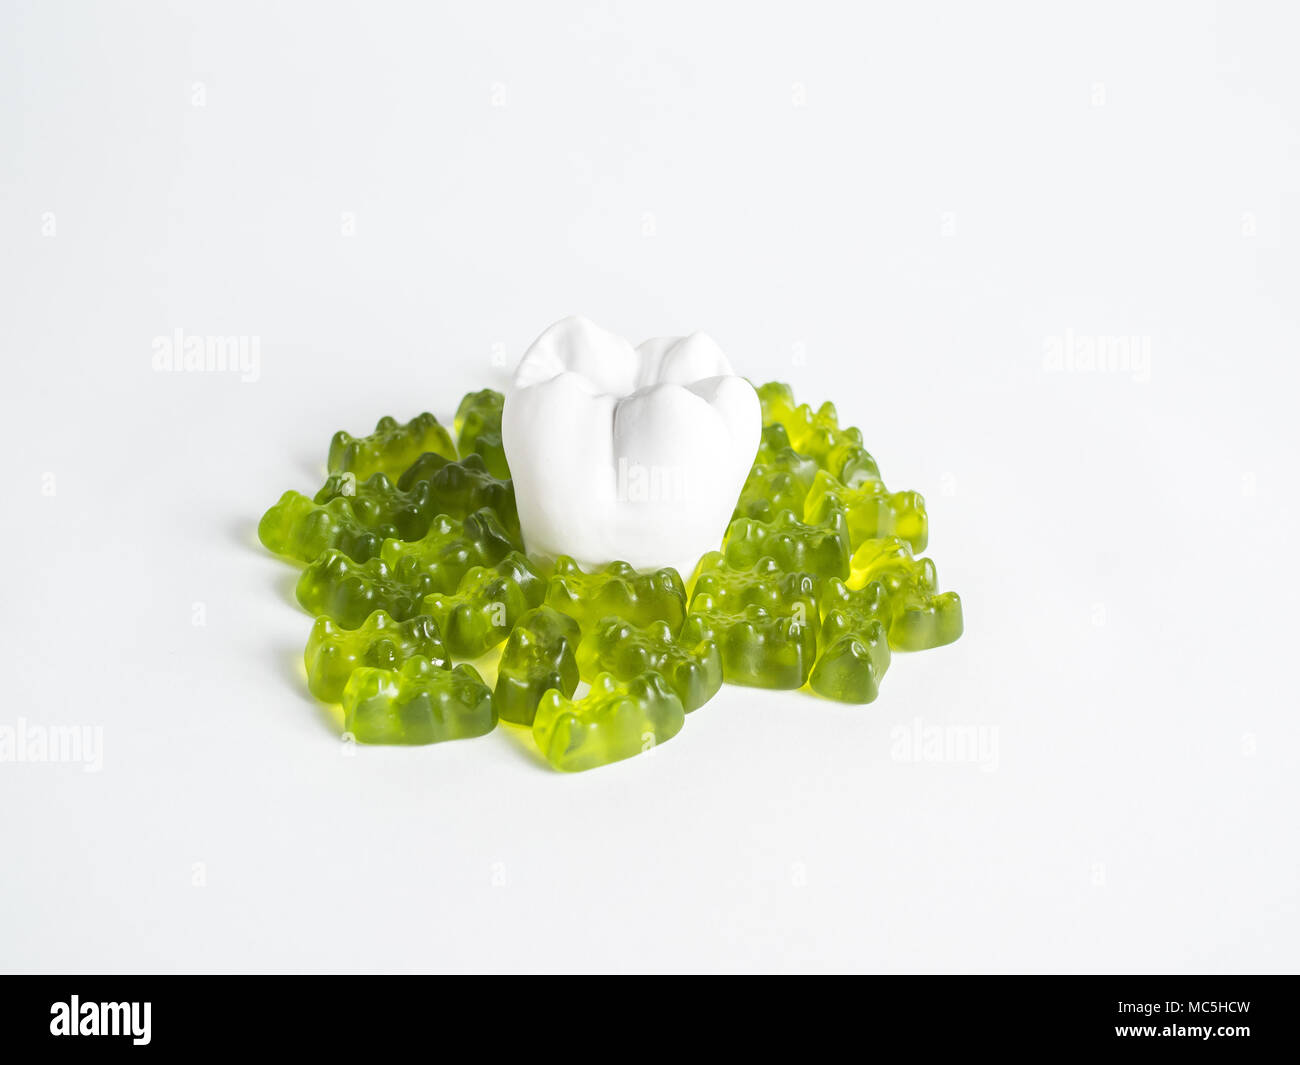 The tooth is surrounded by sweets on the white background Stock Photo